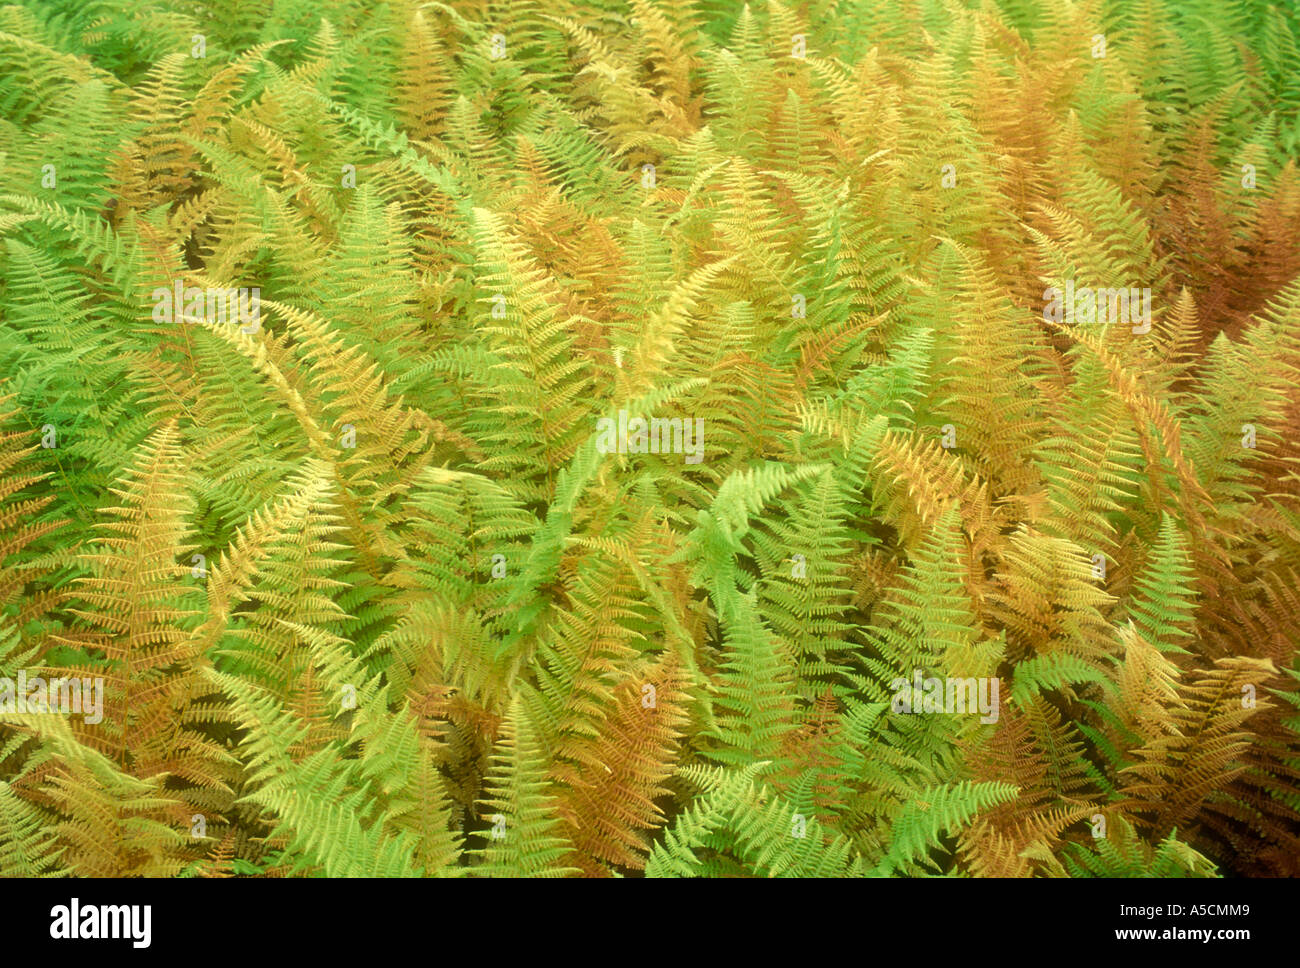 Hayscented fern (Dennstaedtia punctilobula) Large colony of ferns in birch woodlands, in early autumn, Greater Sudbury, Ontario, Canada Stock Photo